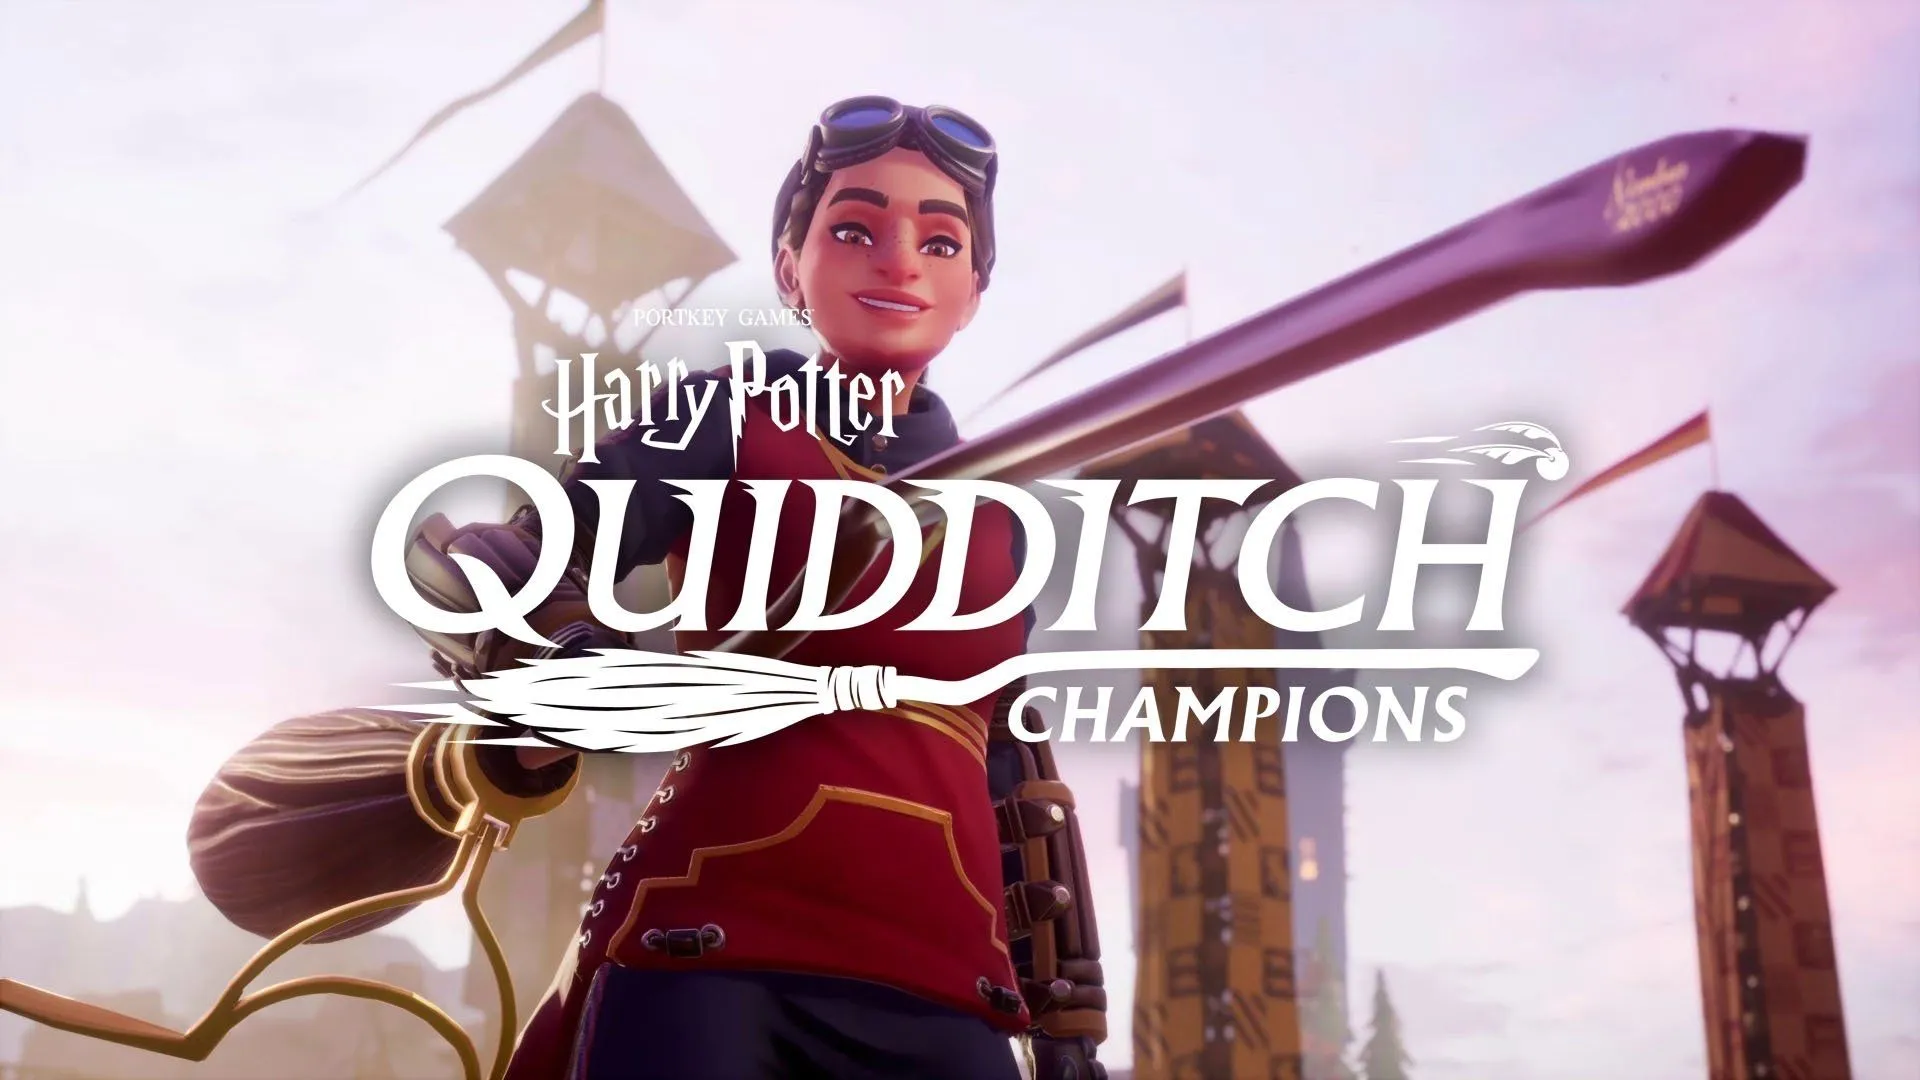 harry potter quidditch champions banner